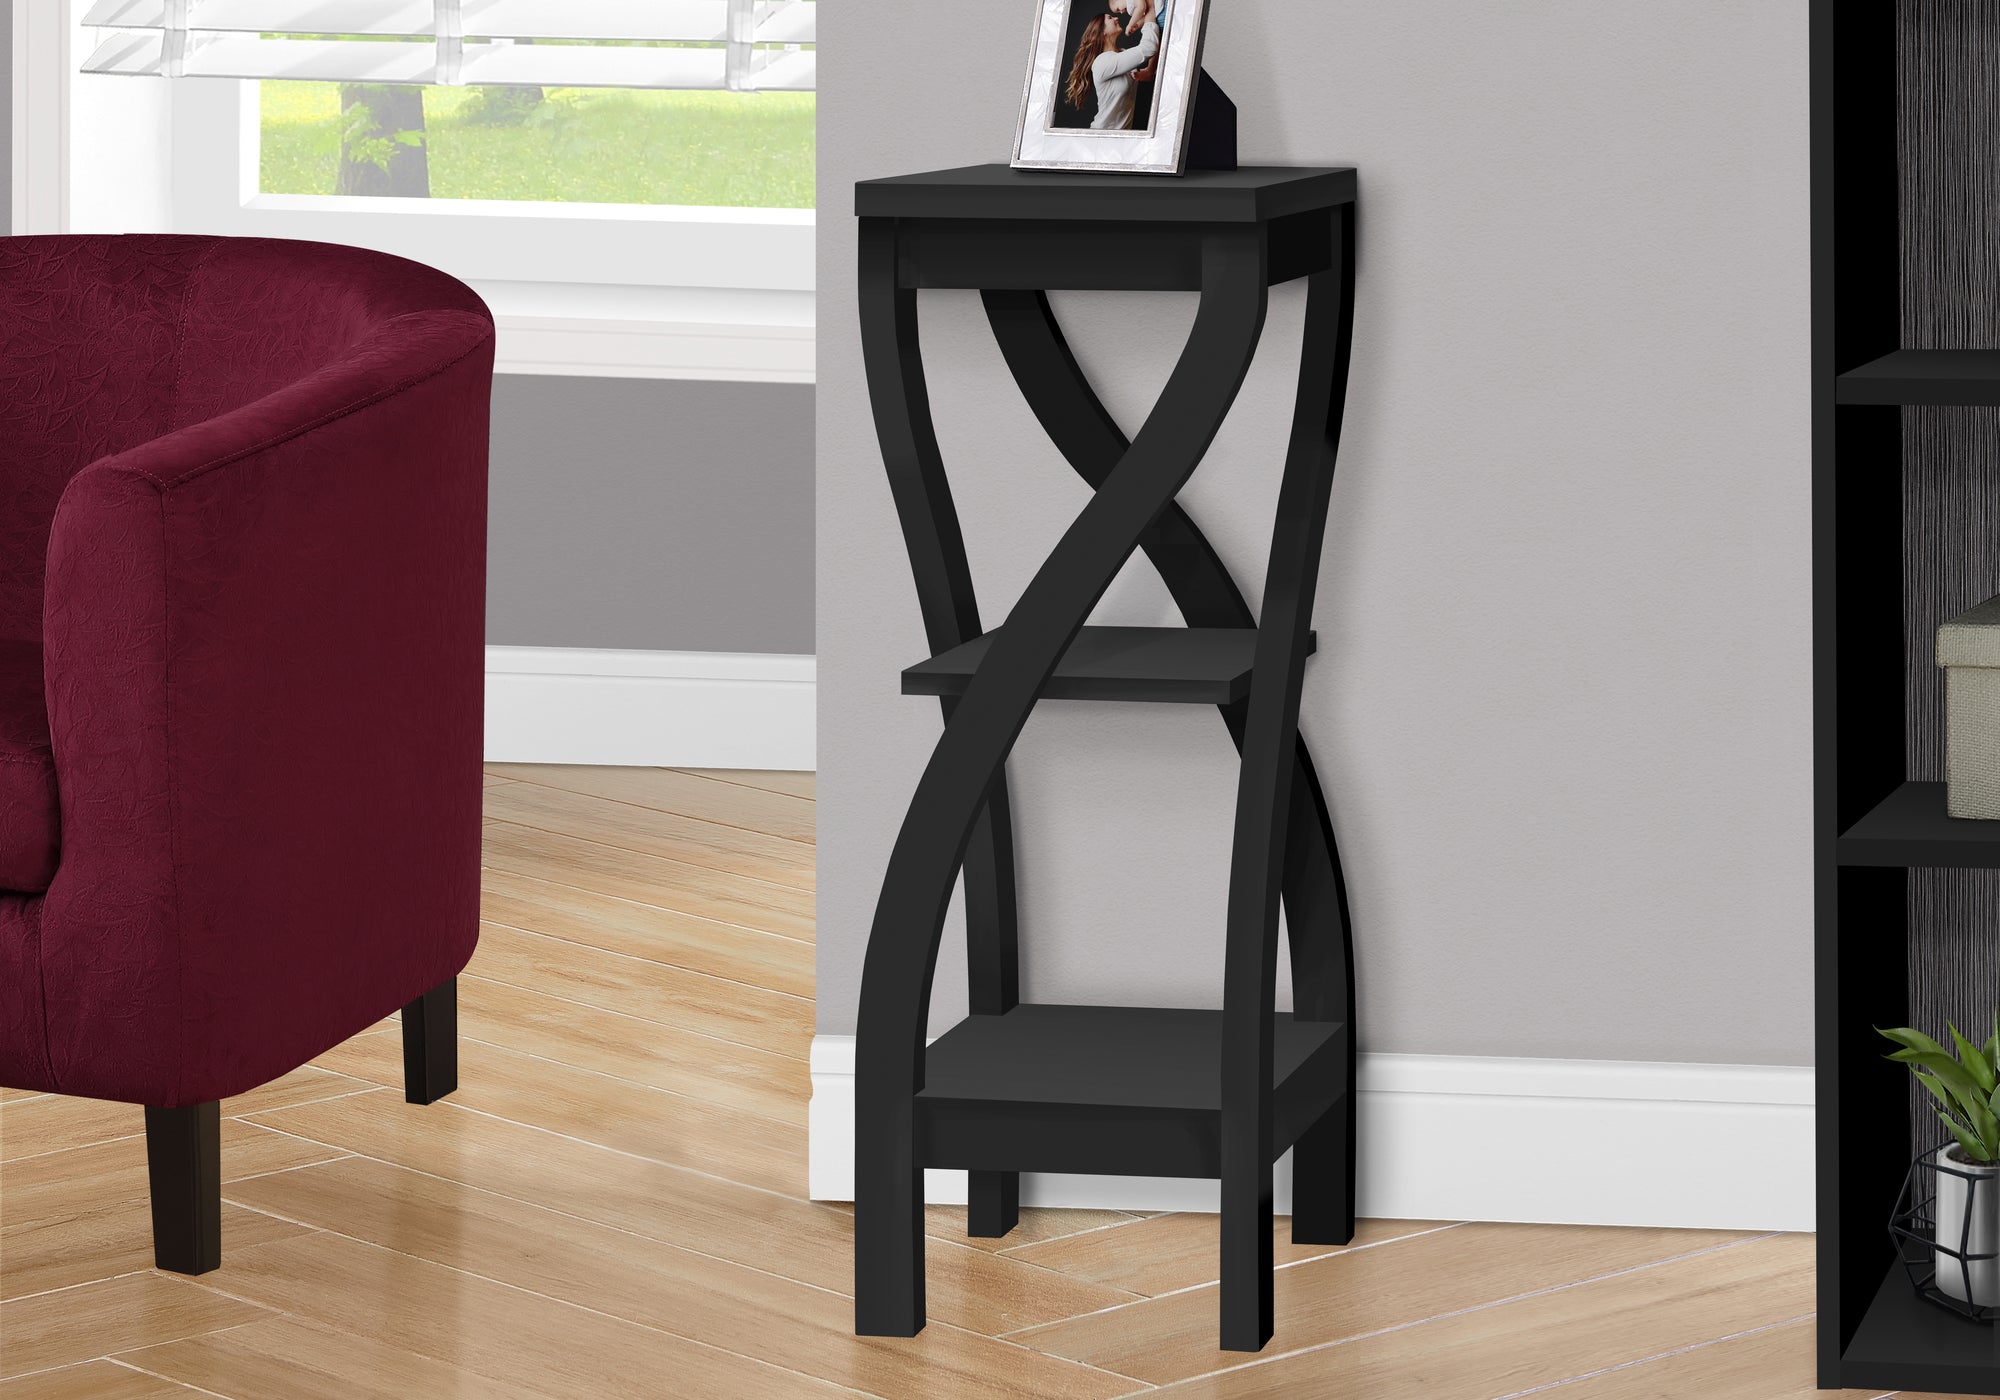 MN-942414    Accent Table, Side, End, Plsant Stand, Square, Living Room, Bedroom, Laminate, Black, Contemporary, Modern